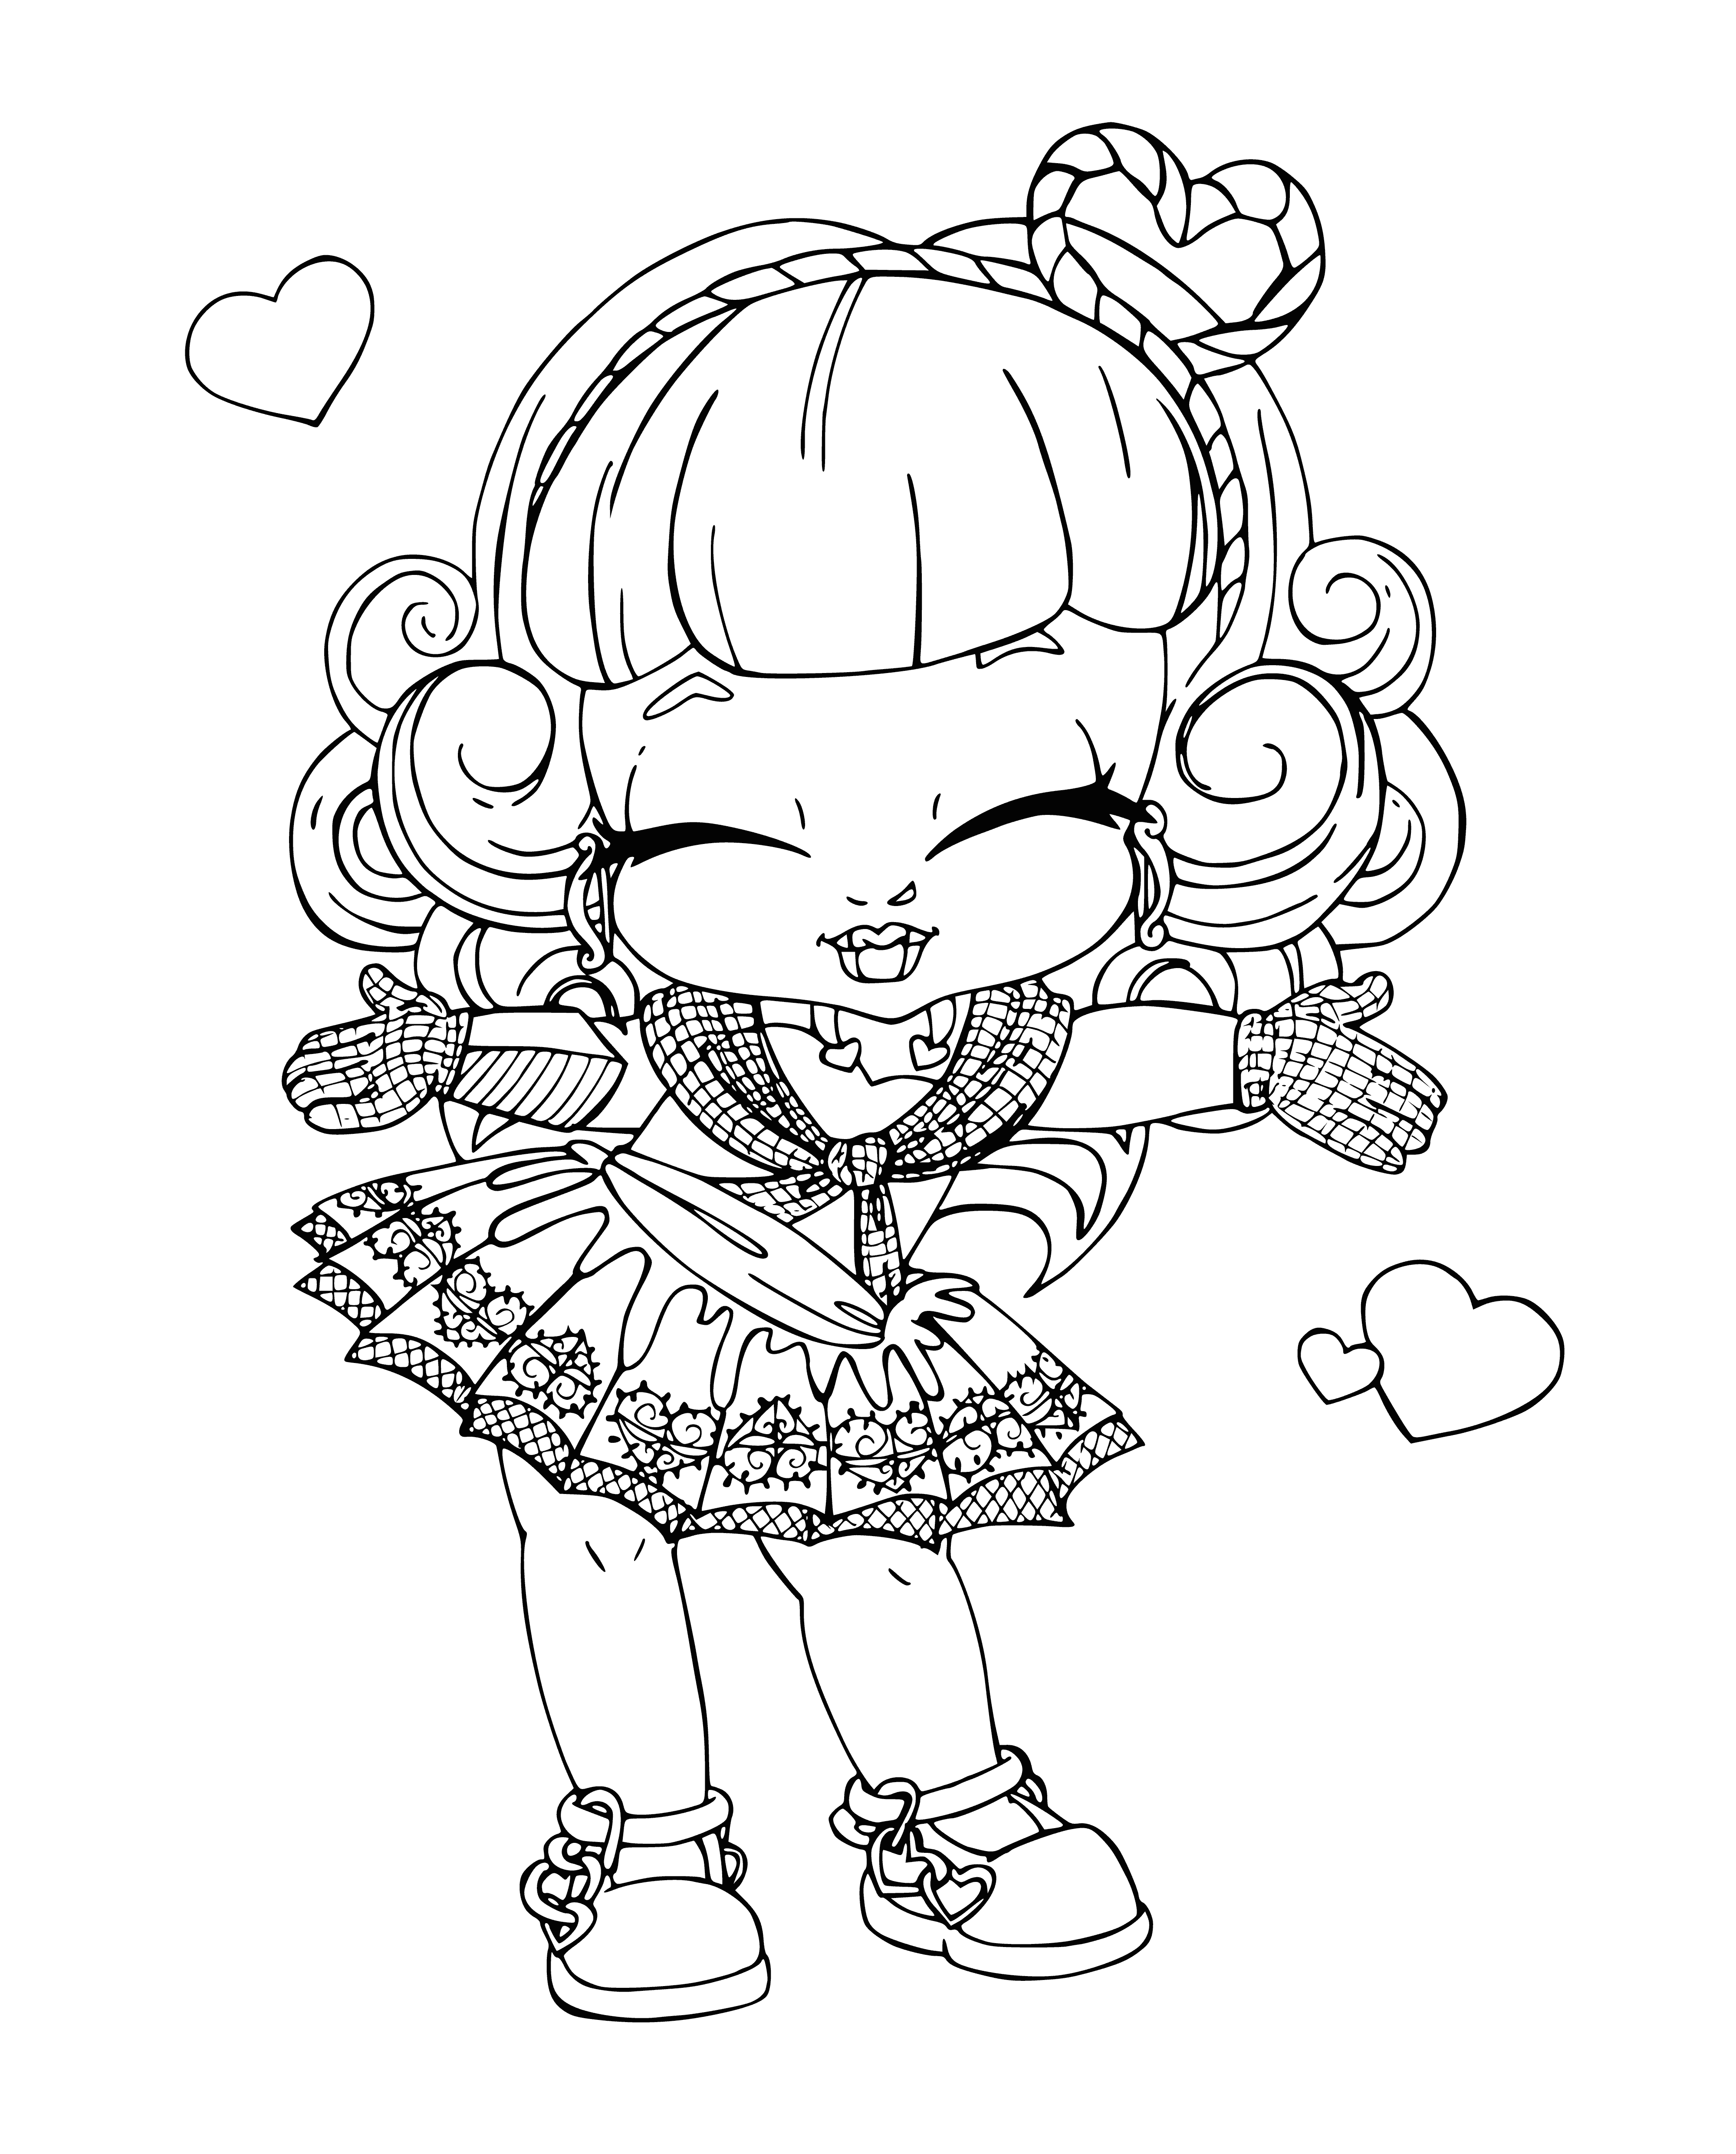 Baby Cupid coloring page